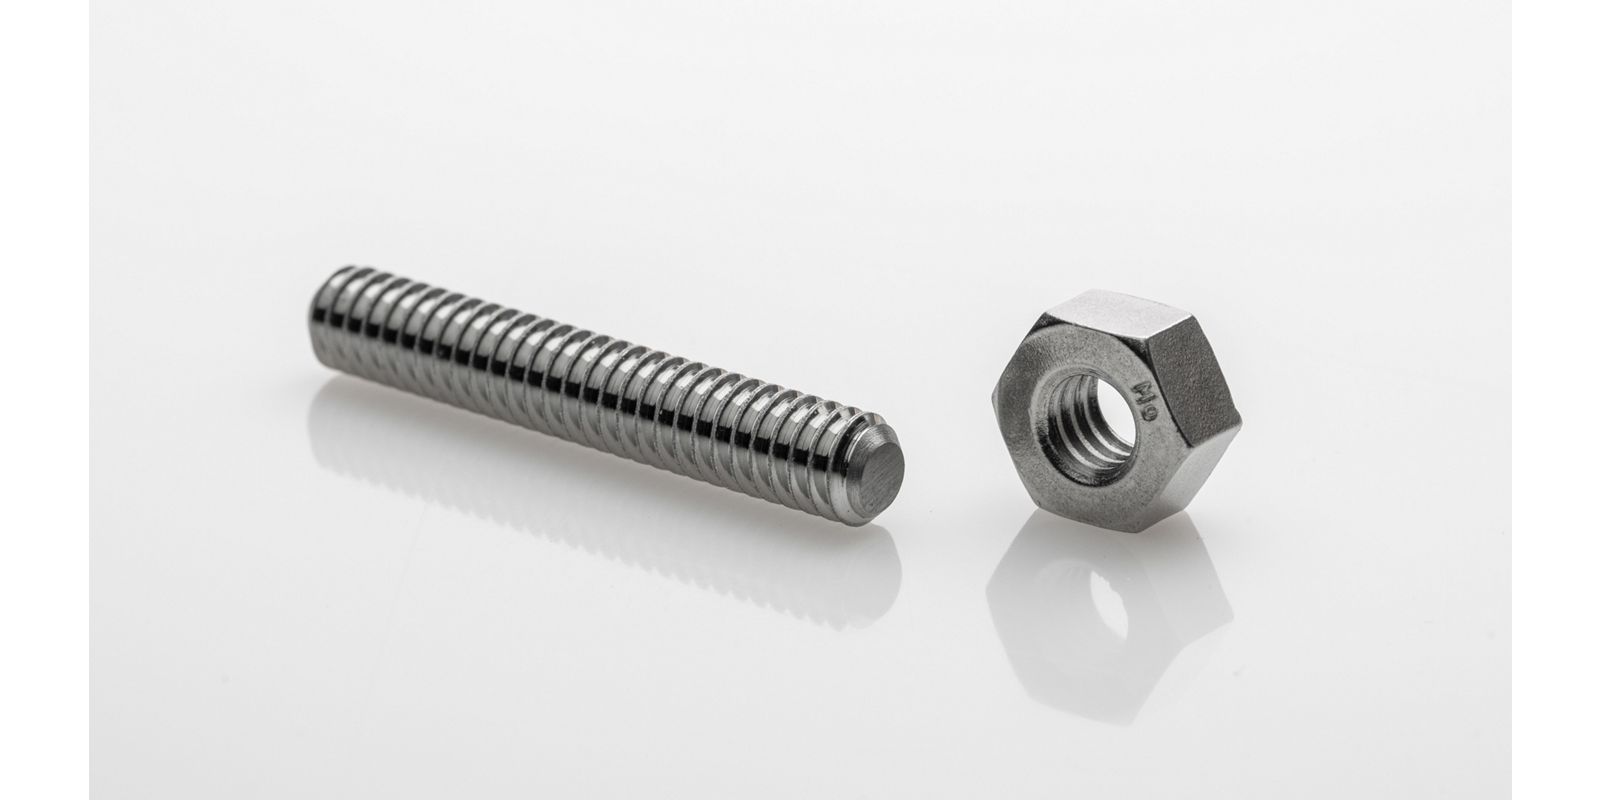 Screws and nuts